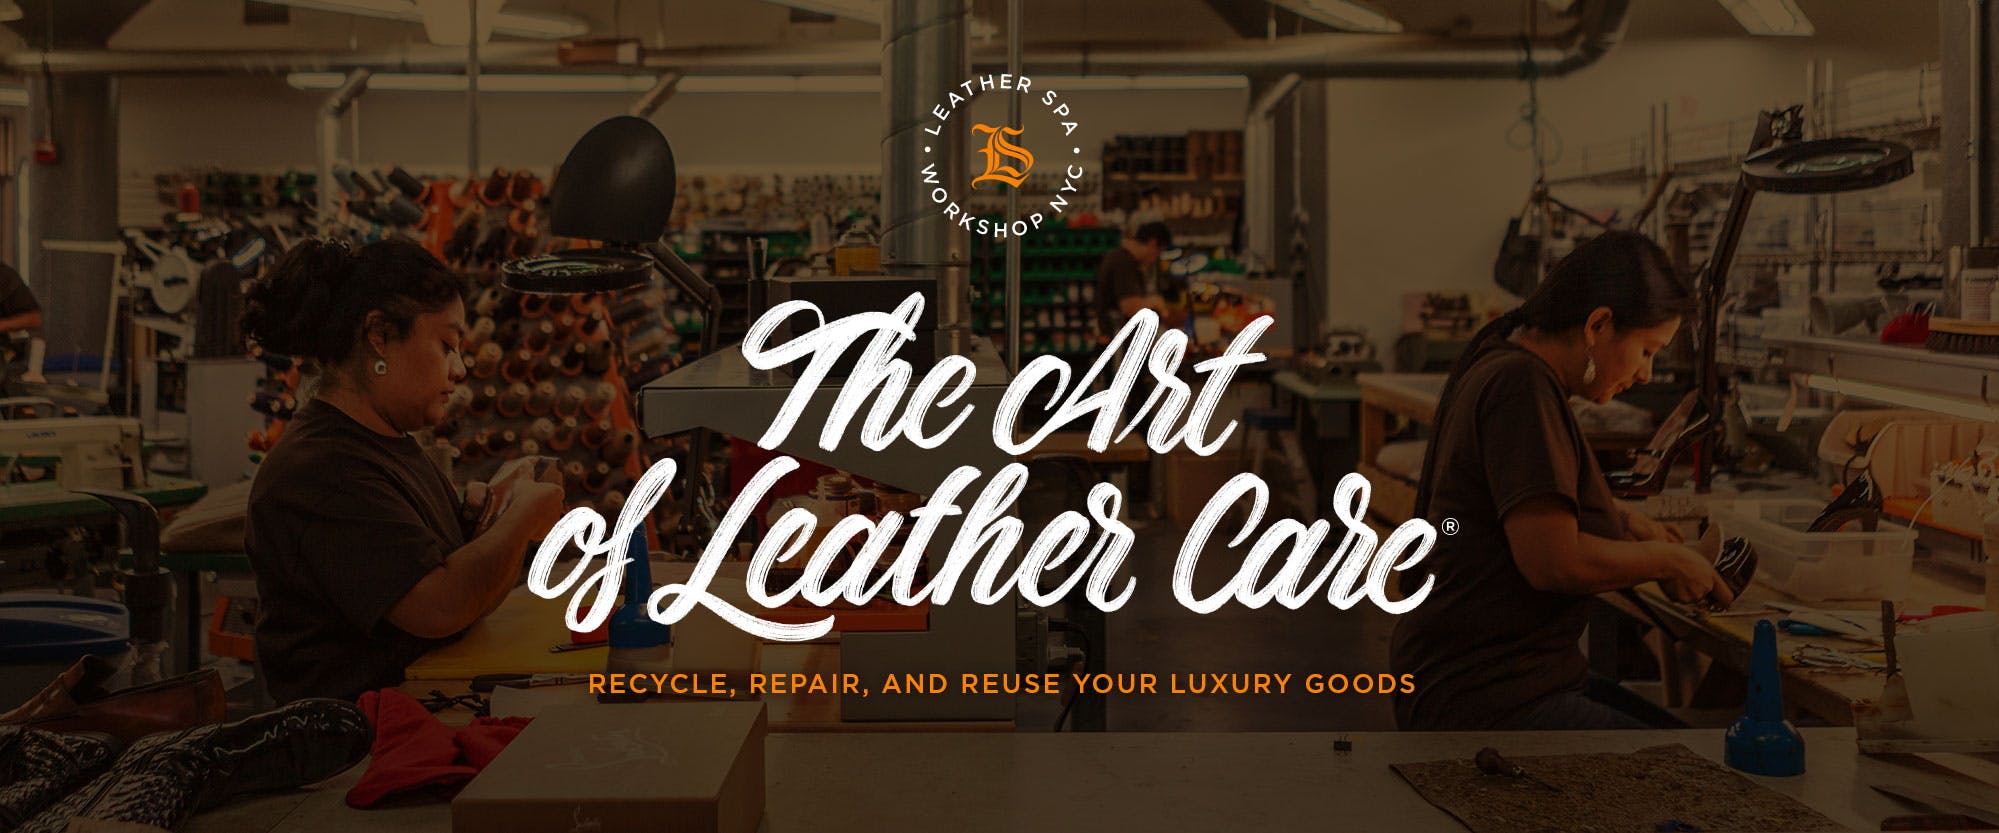 The Art of Leather Care. Recycle, repair, and reuse your luxury goods.